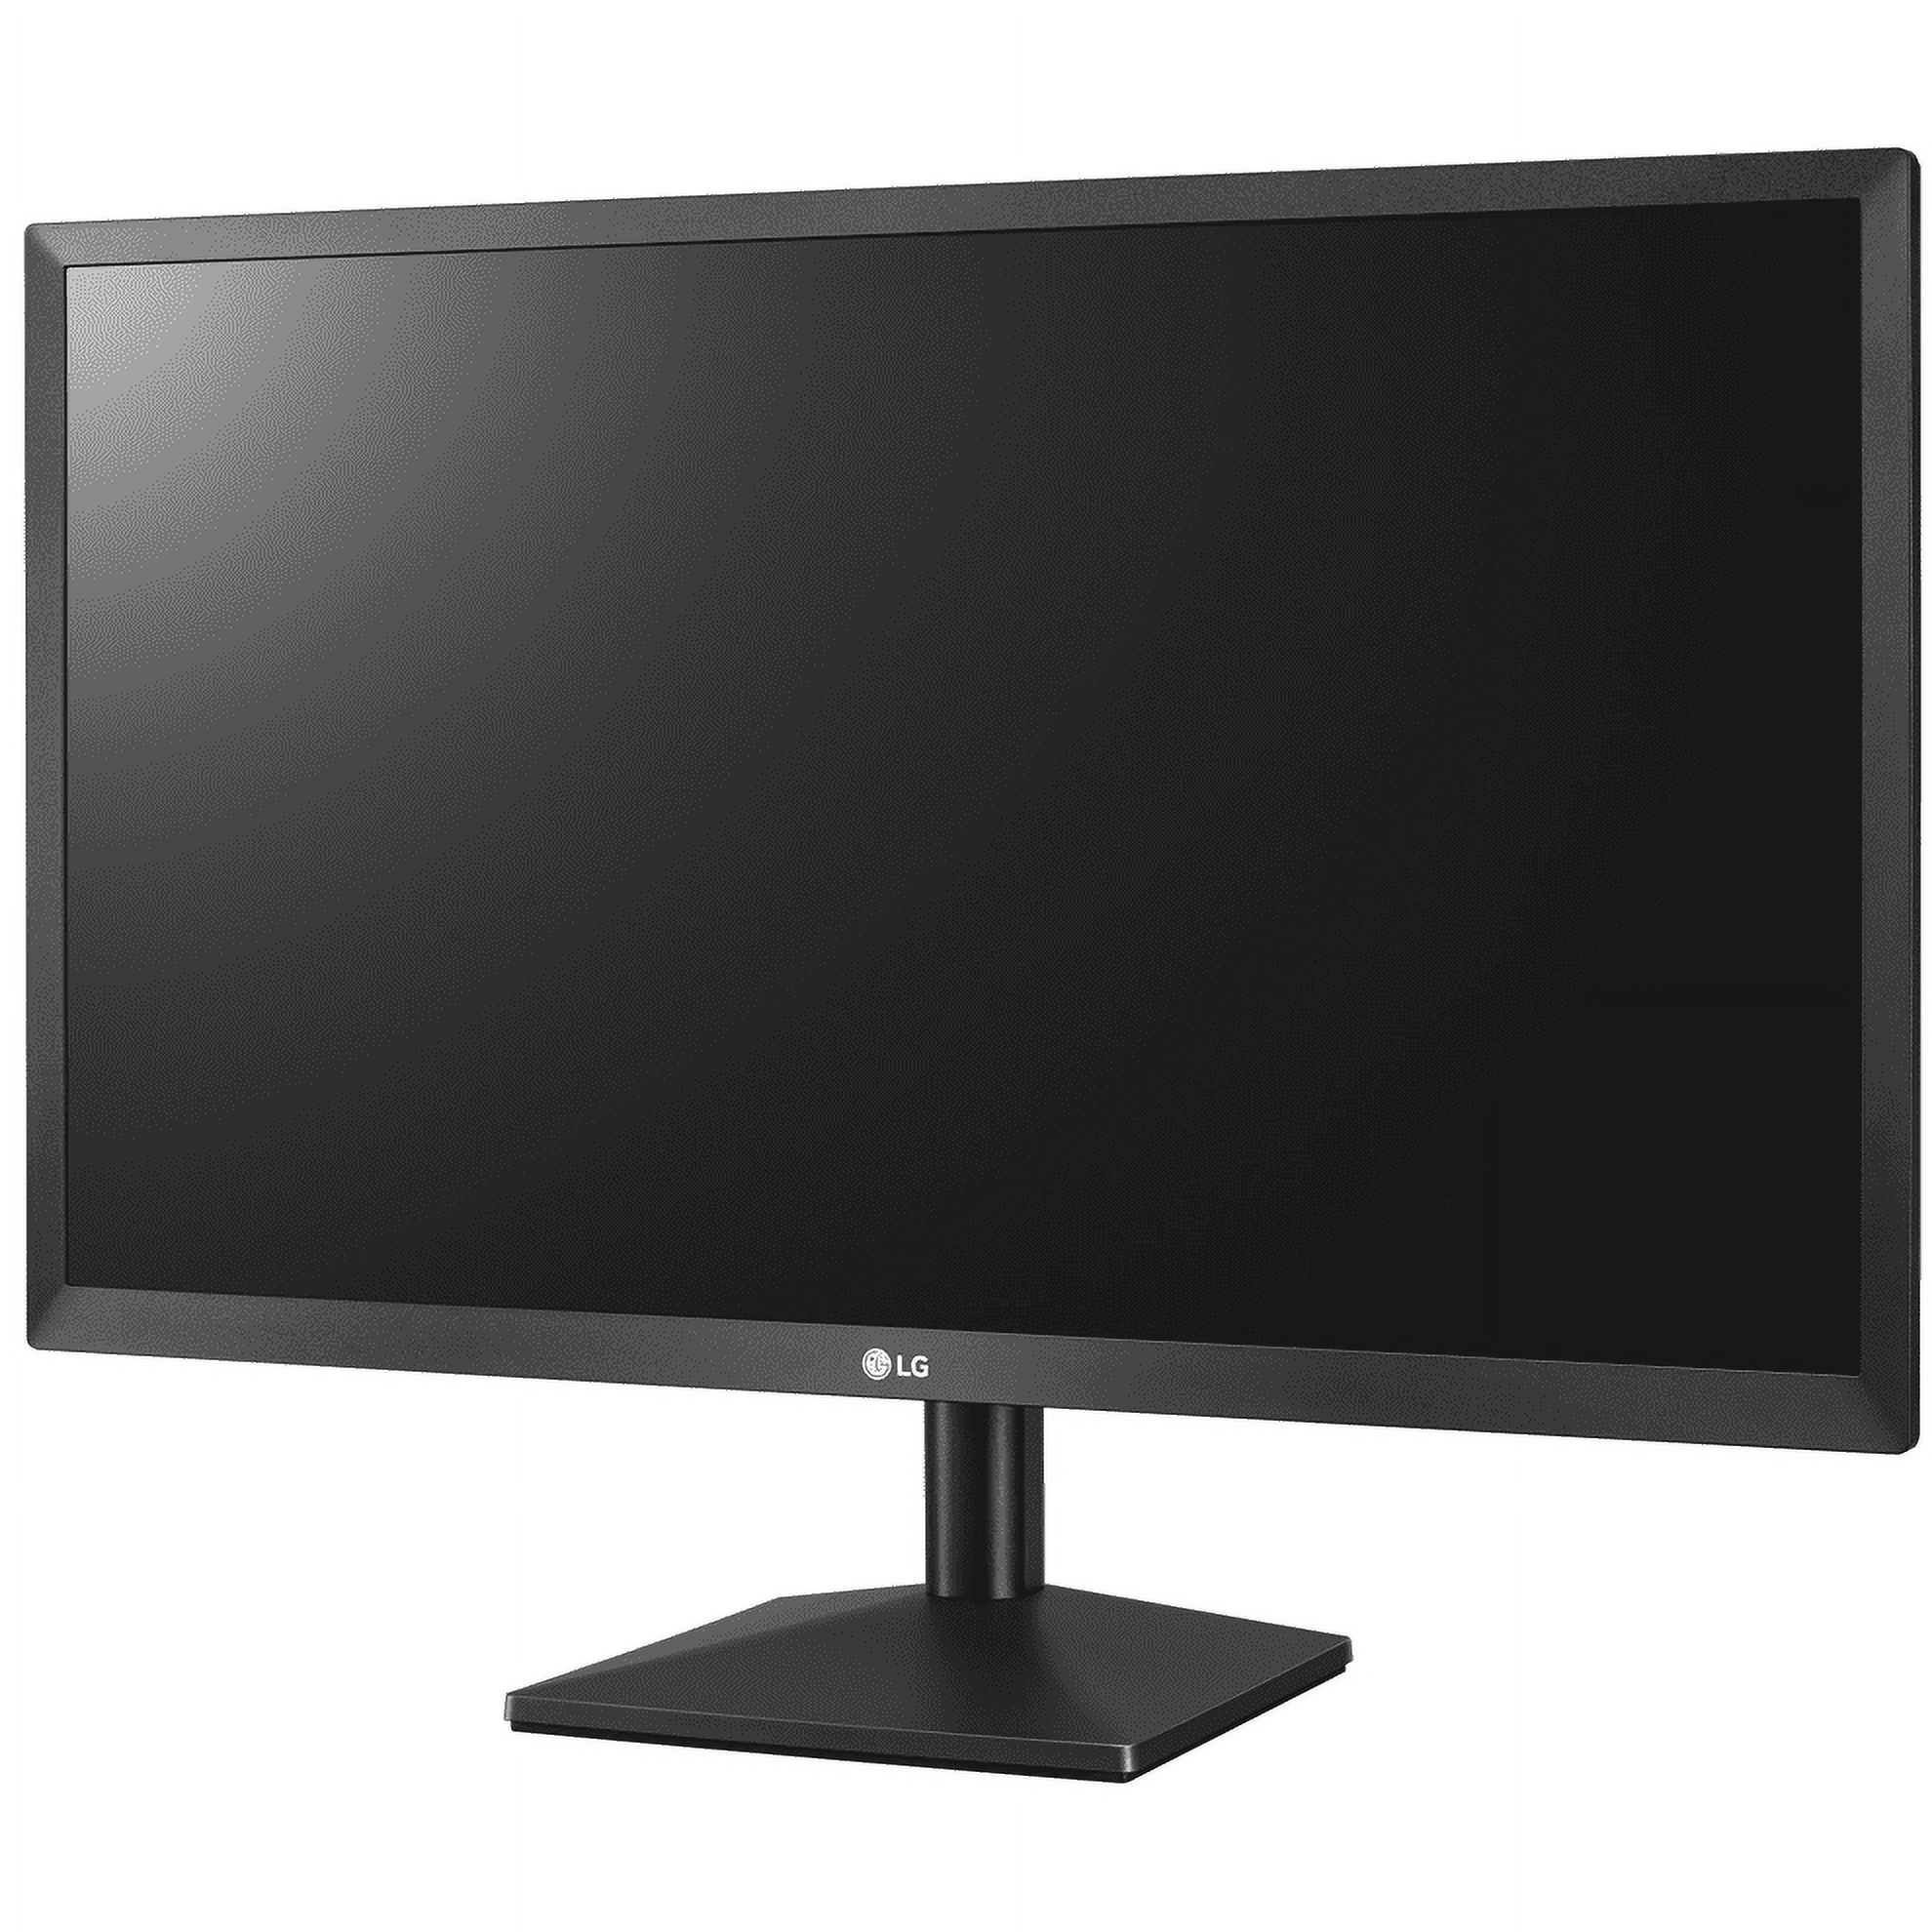 LG Electronics 24MK430H-B 24-inch Class IPS LED Monitor with AMD - image 3 of 9